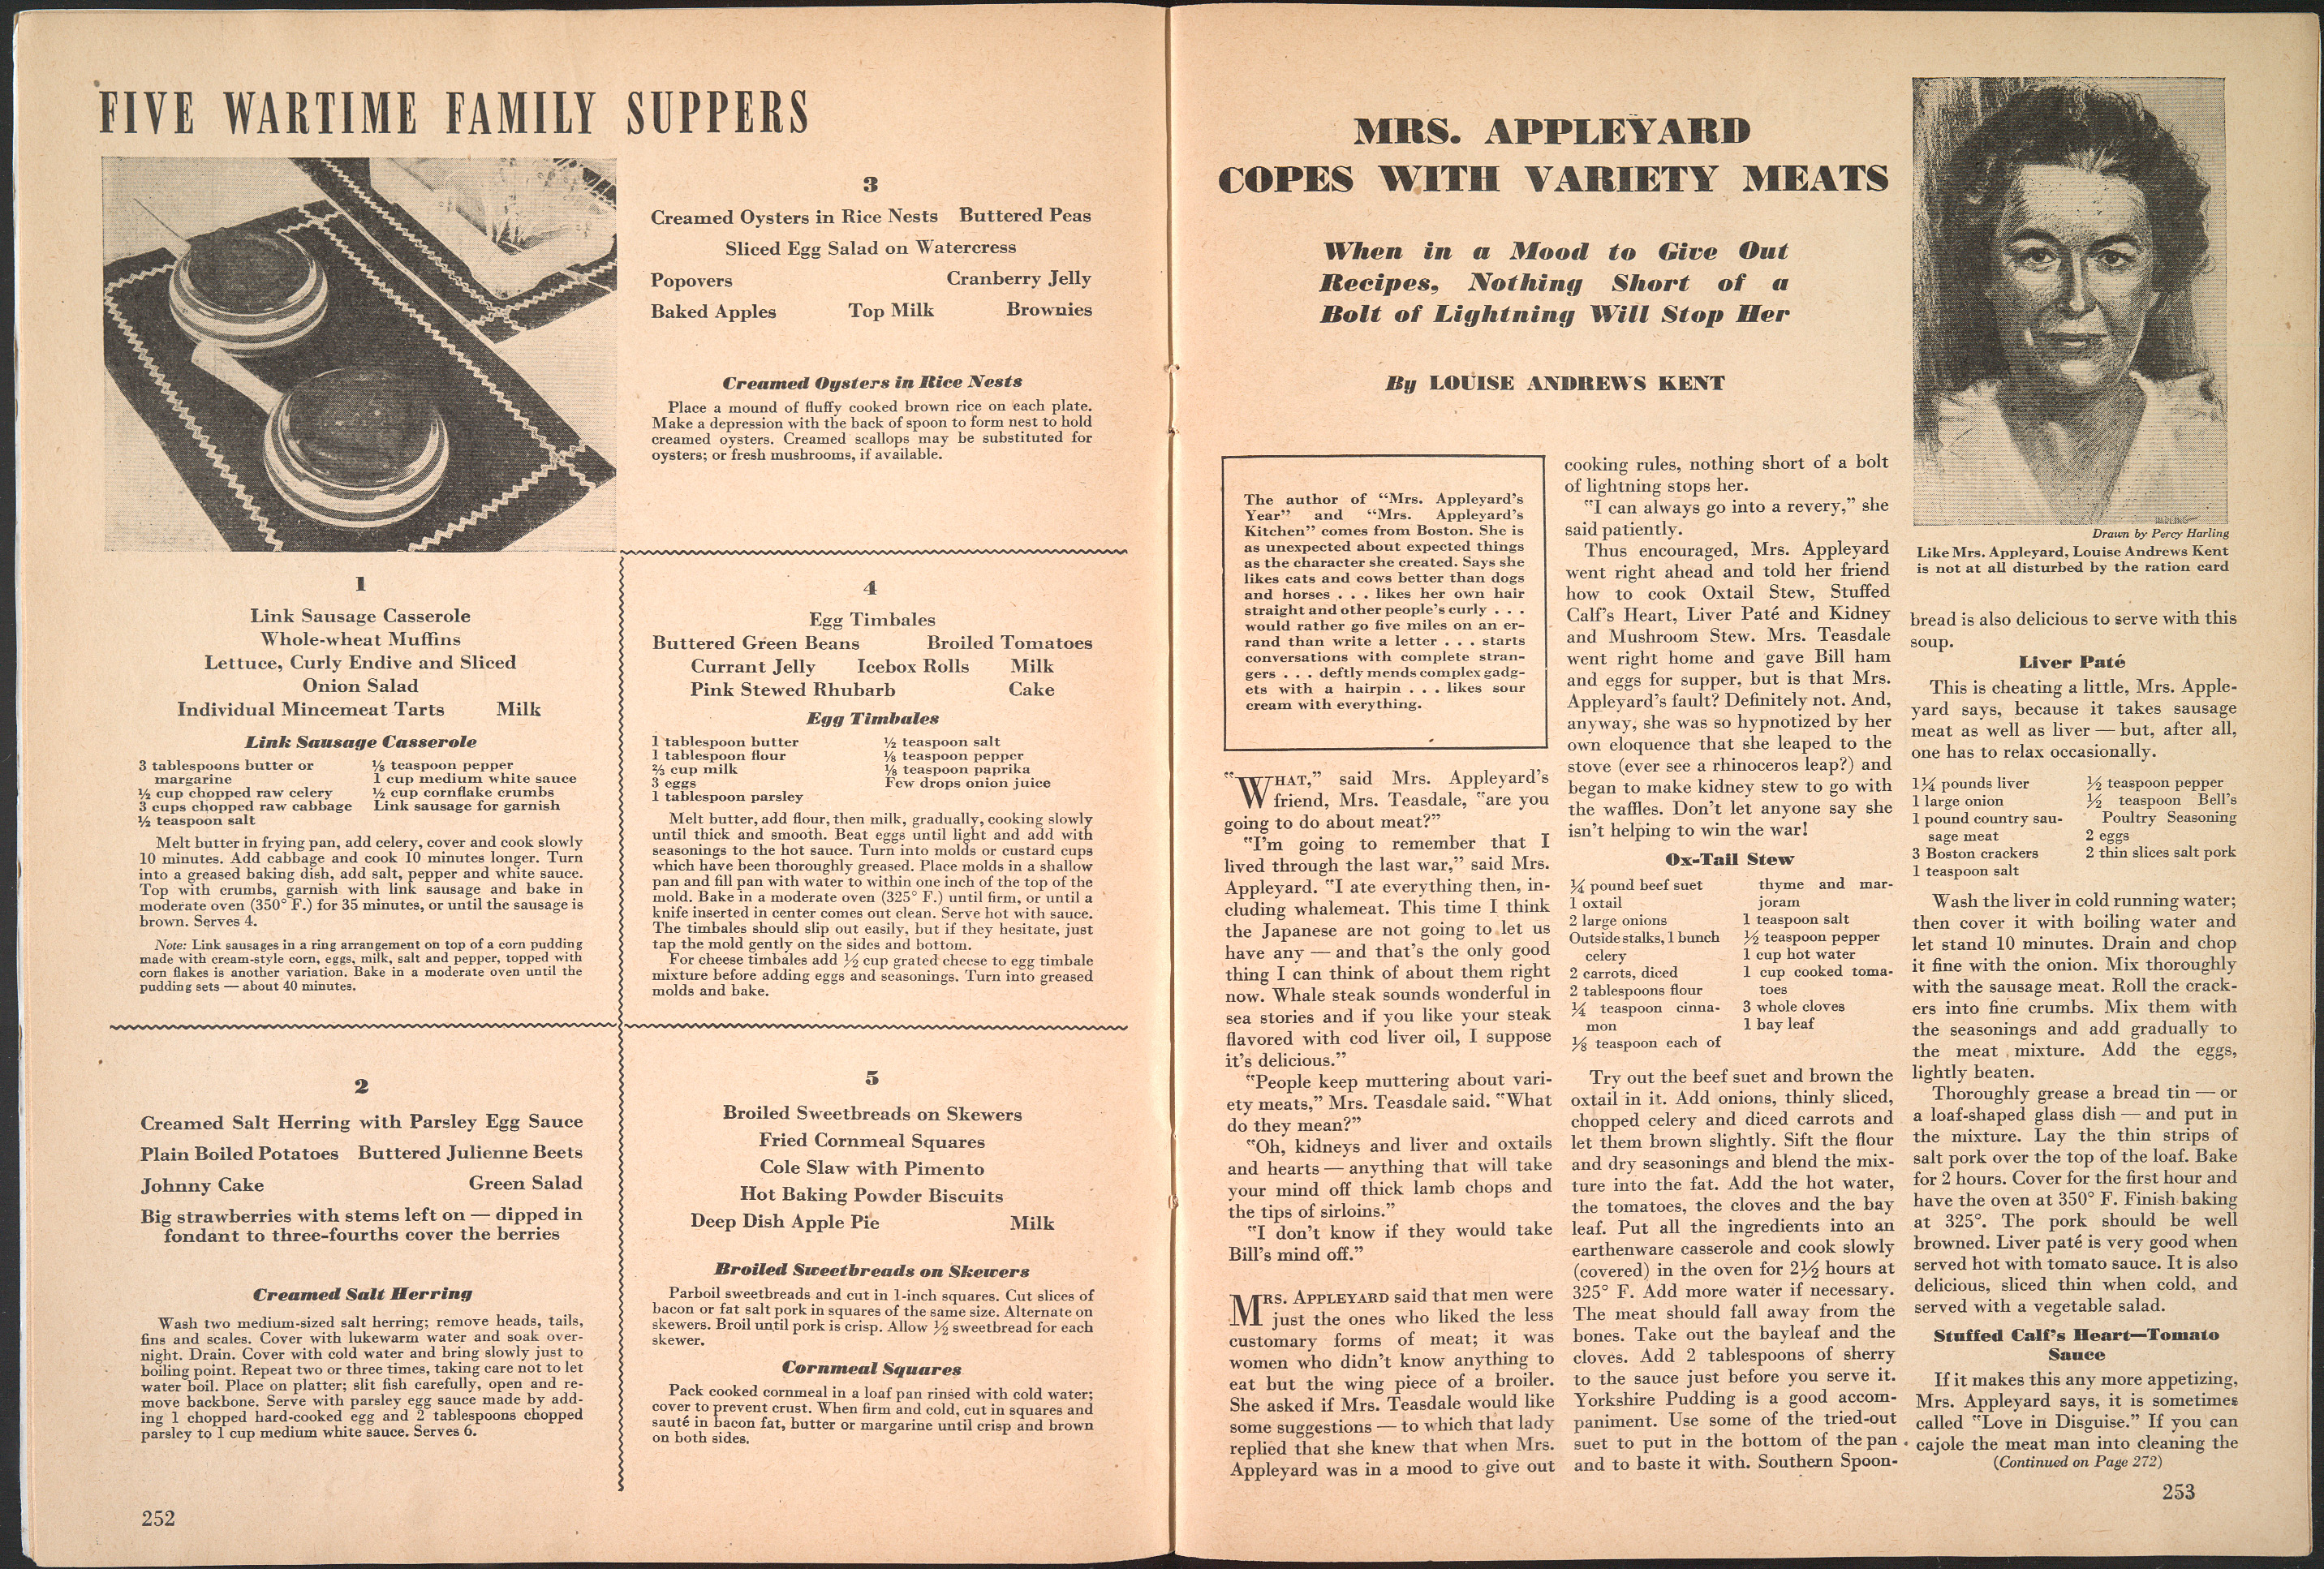 p 252-253 “Mrs. Appleyard Copes with Variety Meats” from Ameican Cookery